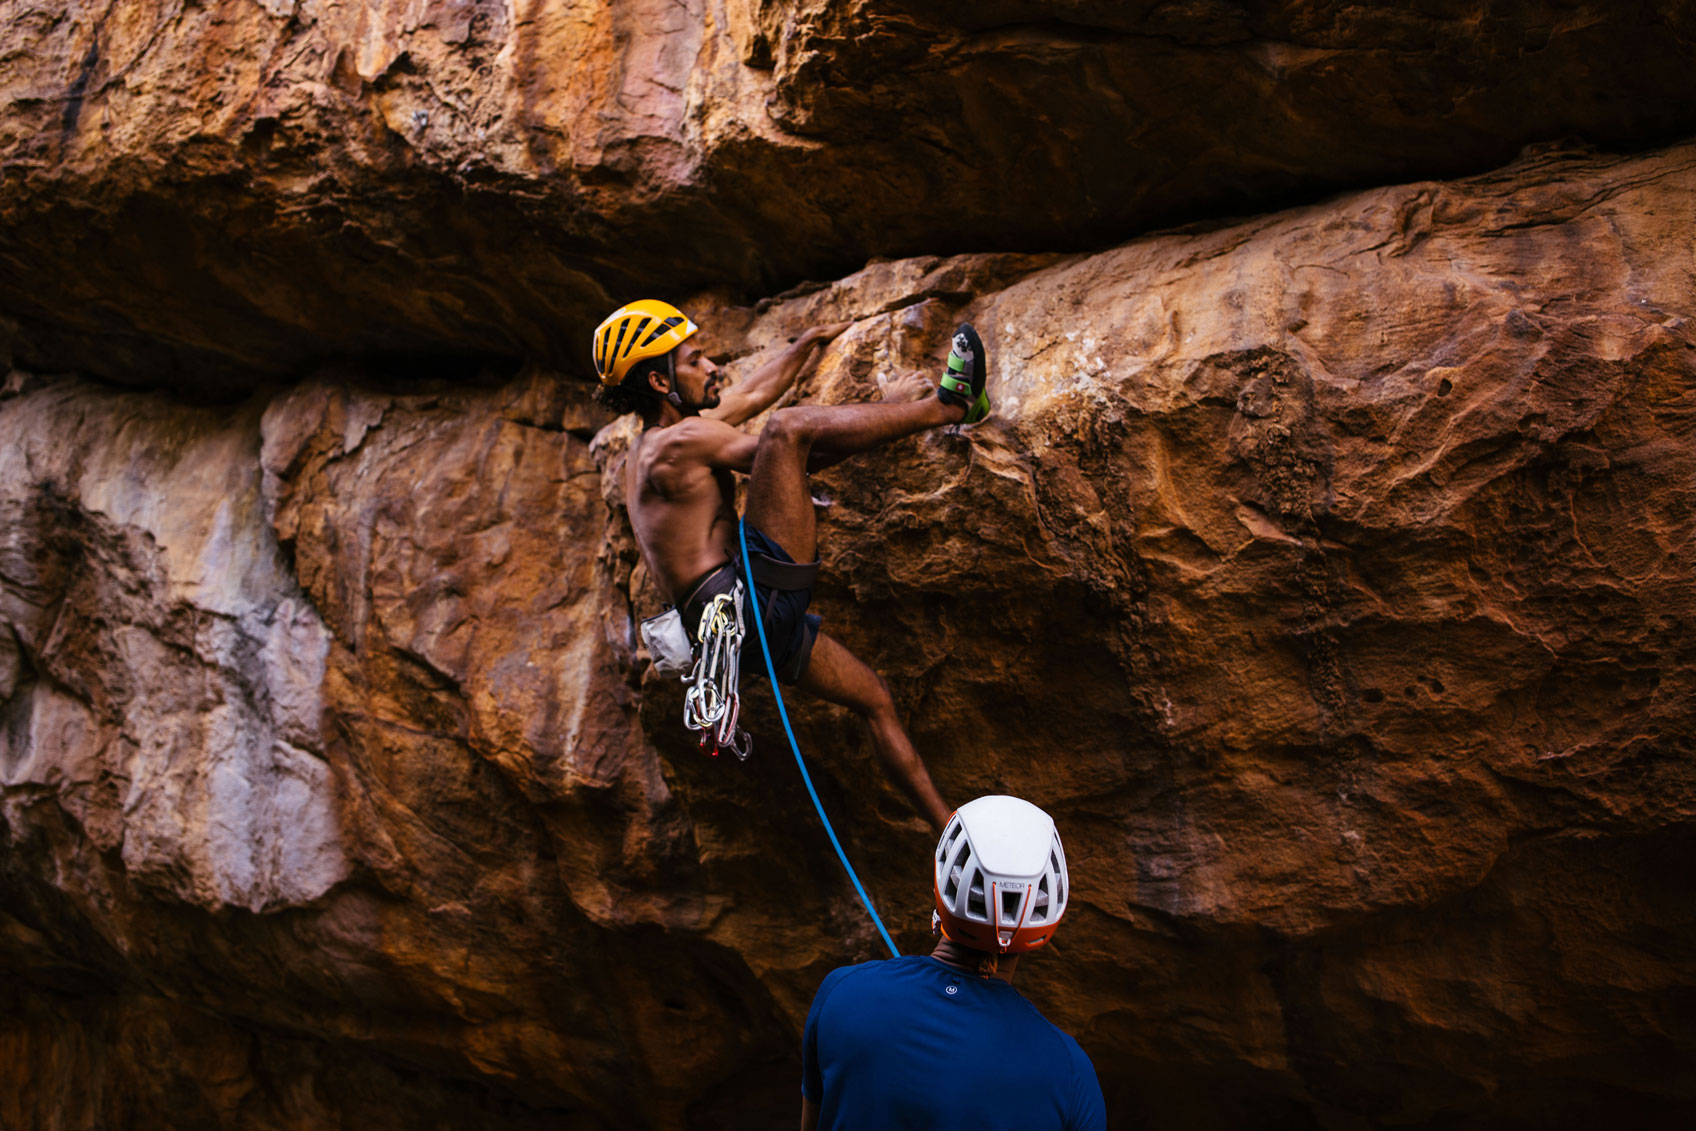 A New Wave of Rock Climbing Is Developing in India